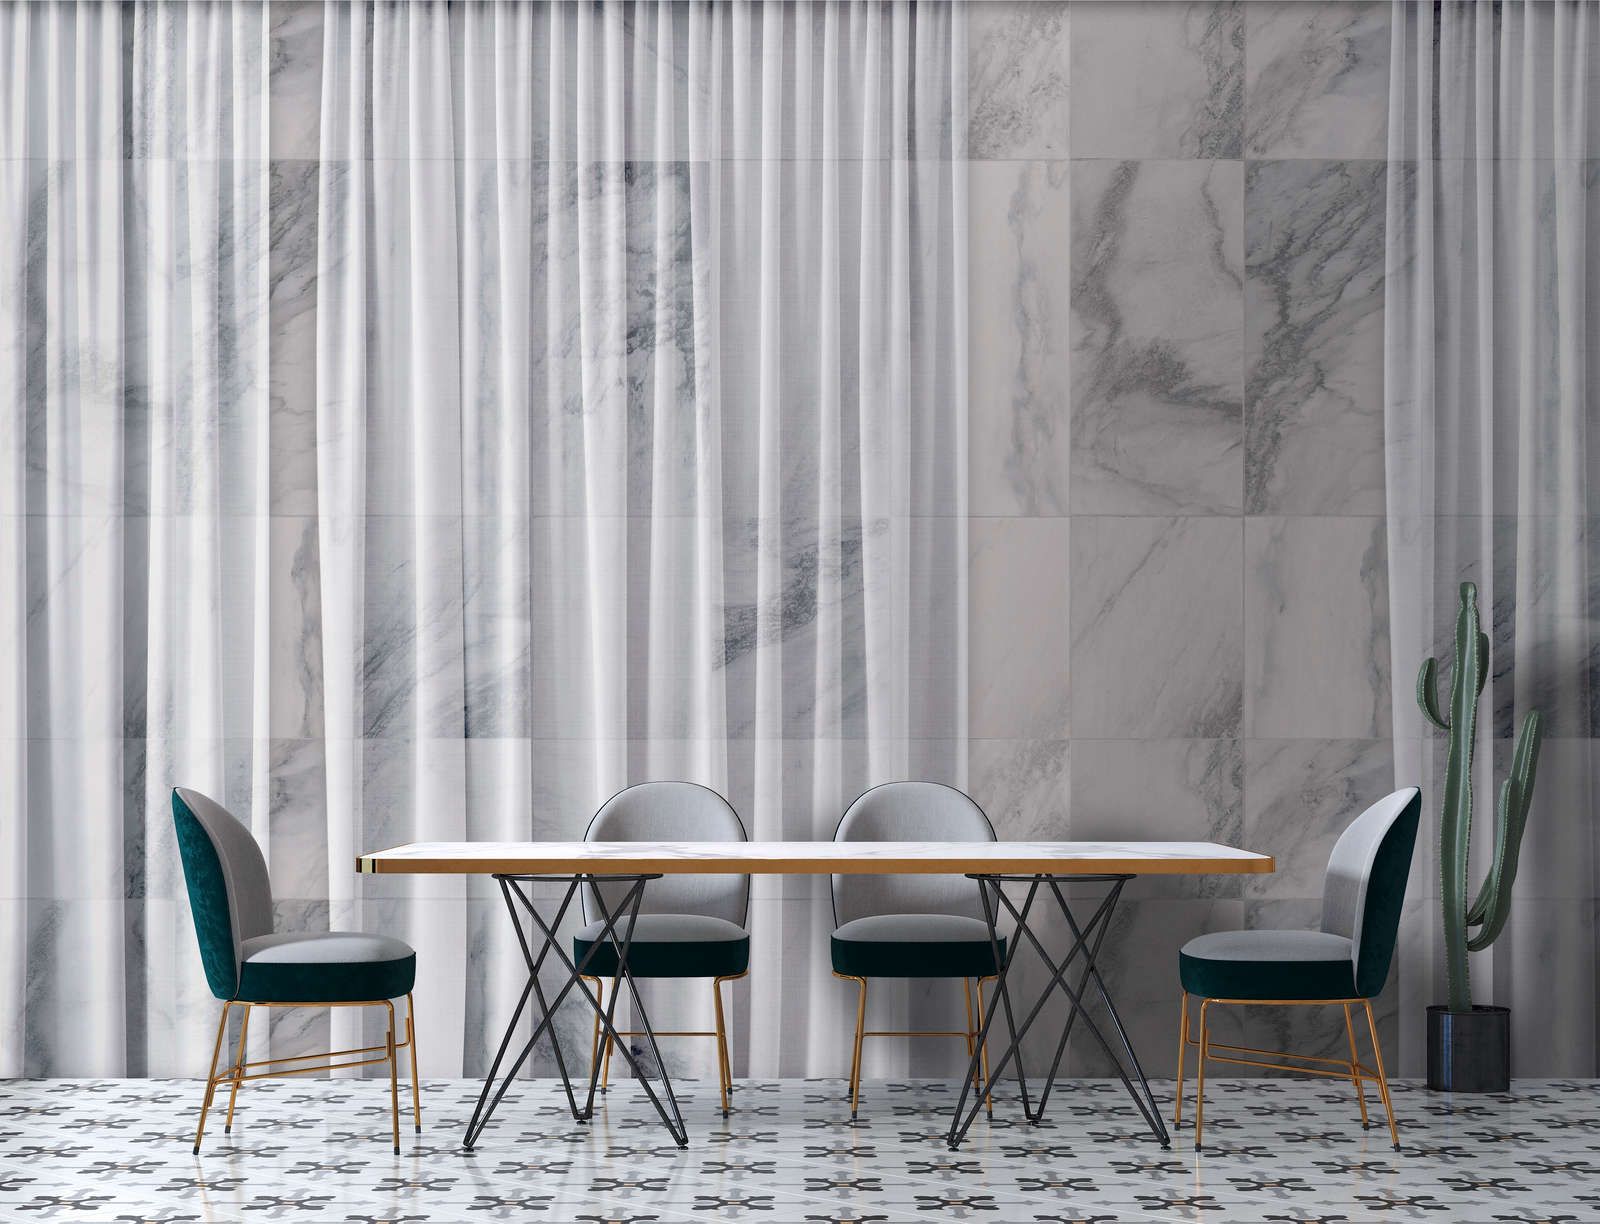             Photo wallpaper »nova 1« - Subtle falling white curtain in front of a marble wall - Lightly textured non-woven fabric
        